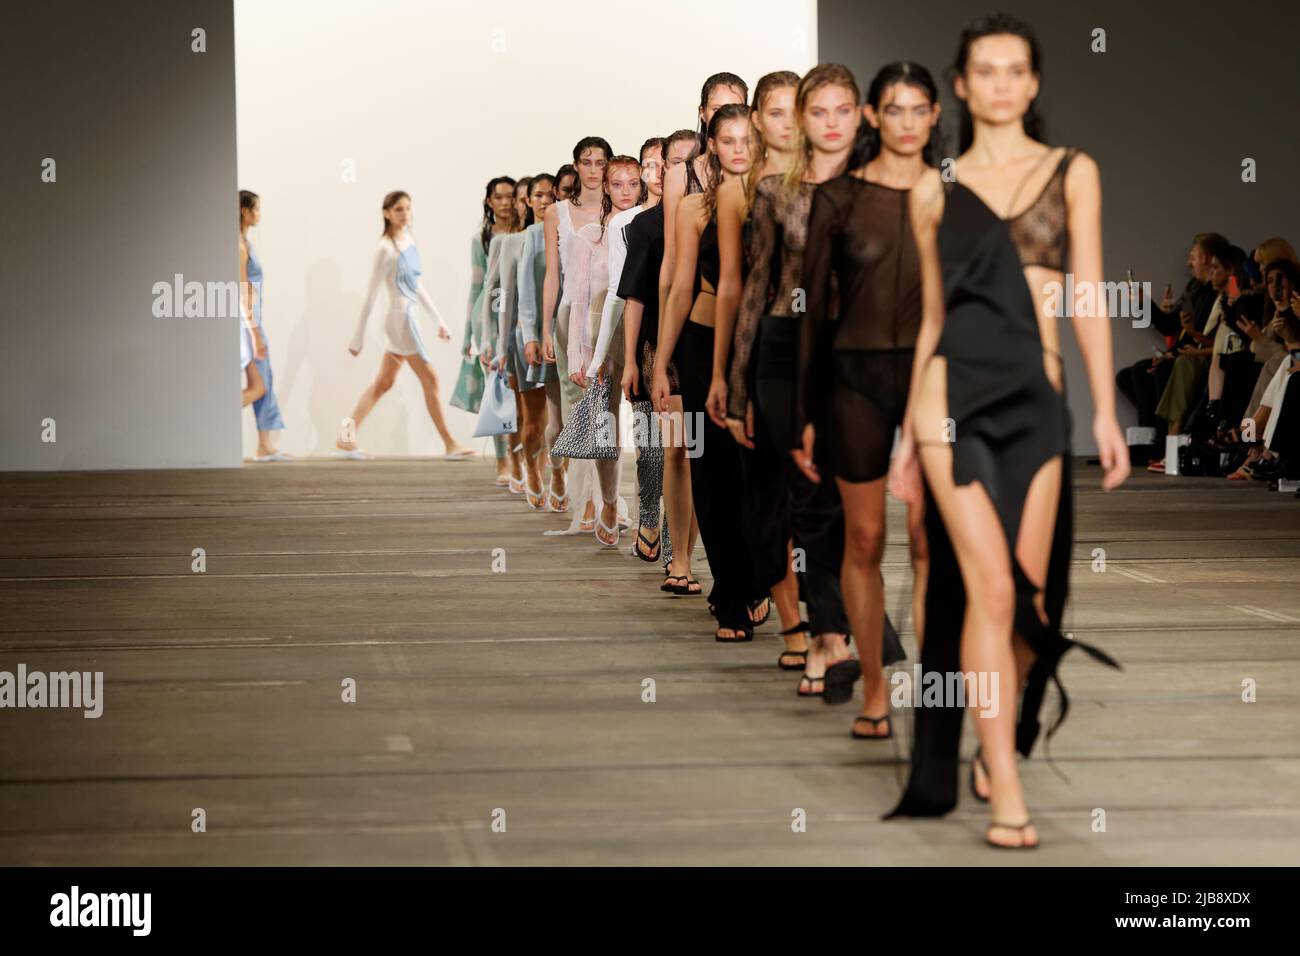 Models walk the runway during the KARLA SPETIC show during the Afterpay Australian Fashion Week 2022 at Carriageworks on May 11, 2022 in Sydney, Austr Stock Photo